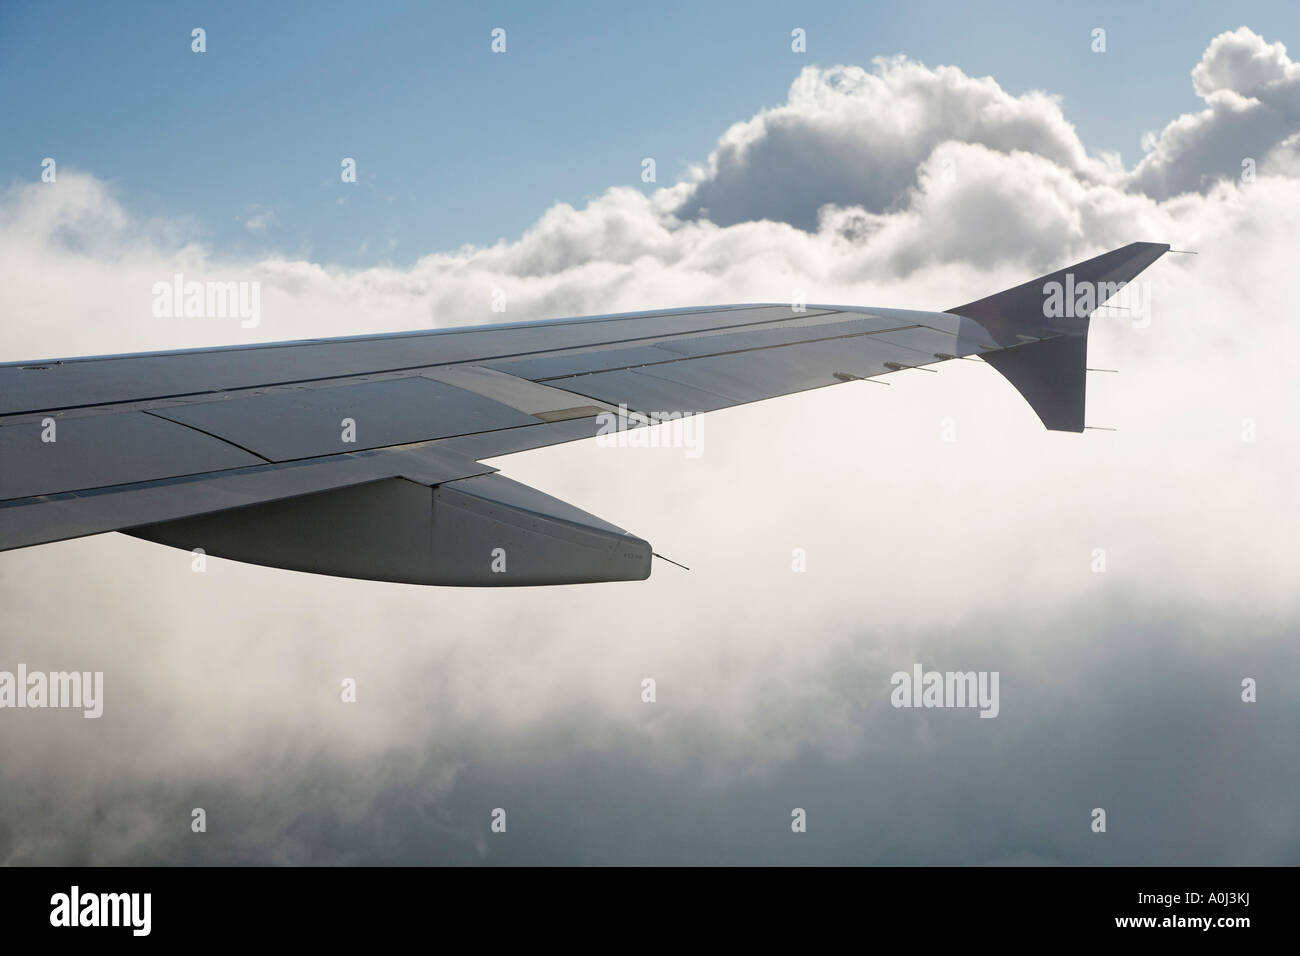 Wing of airplane above clouds Stock Photo